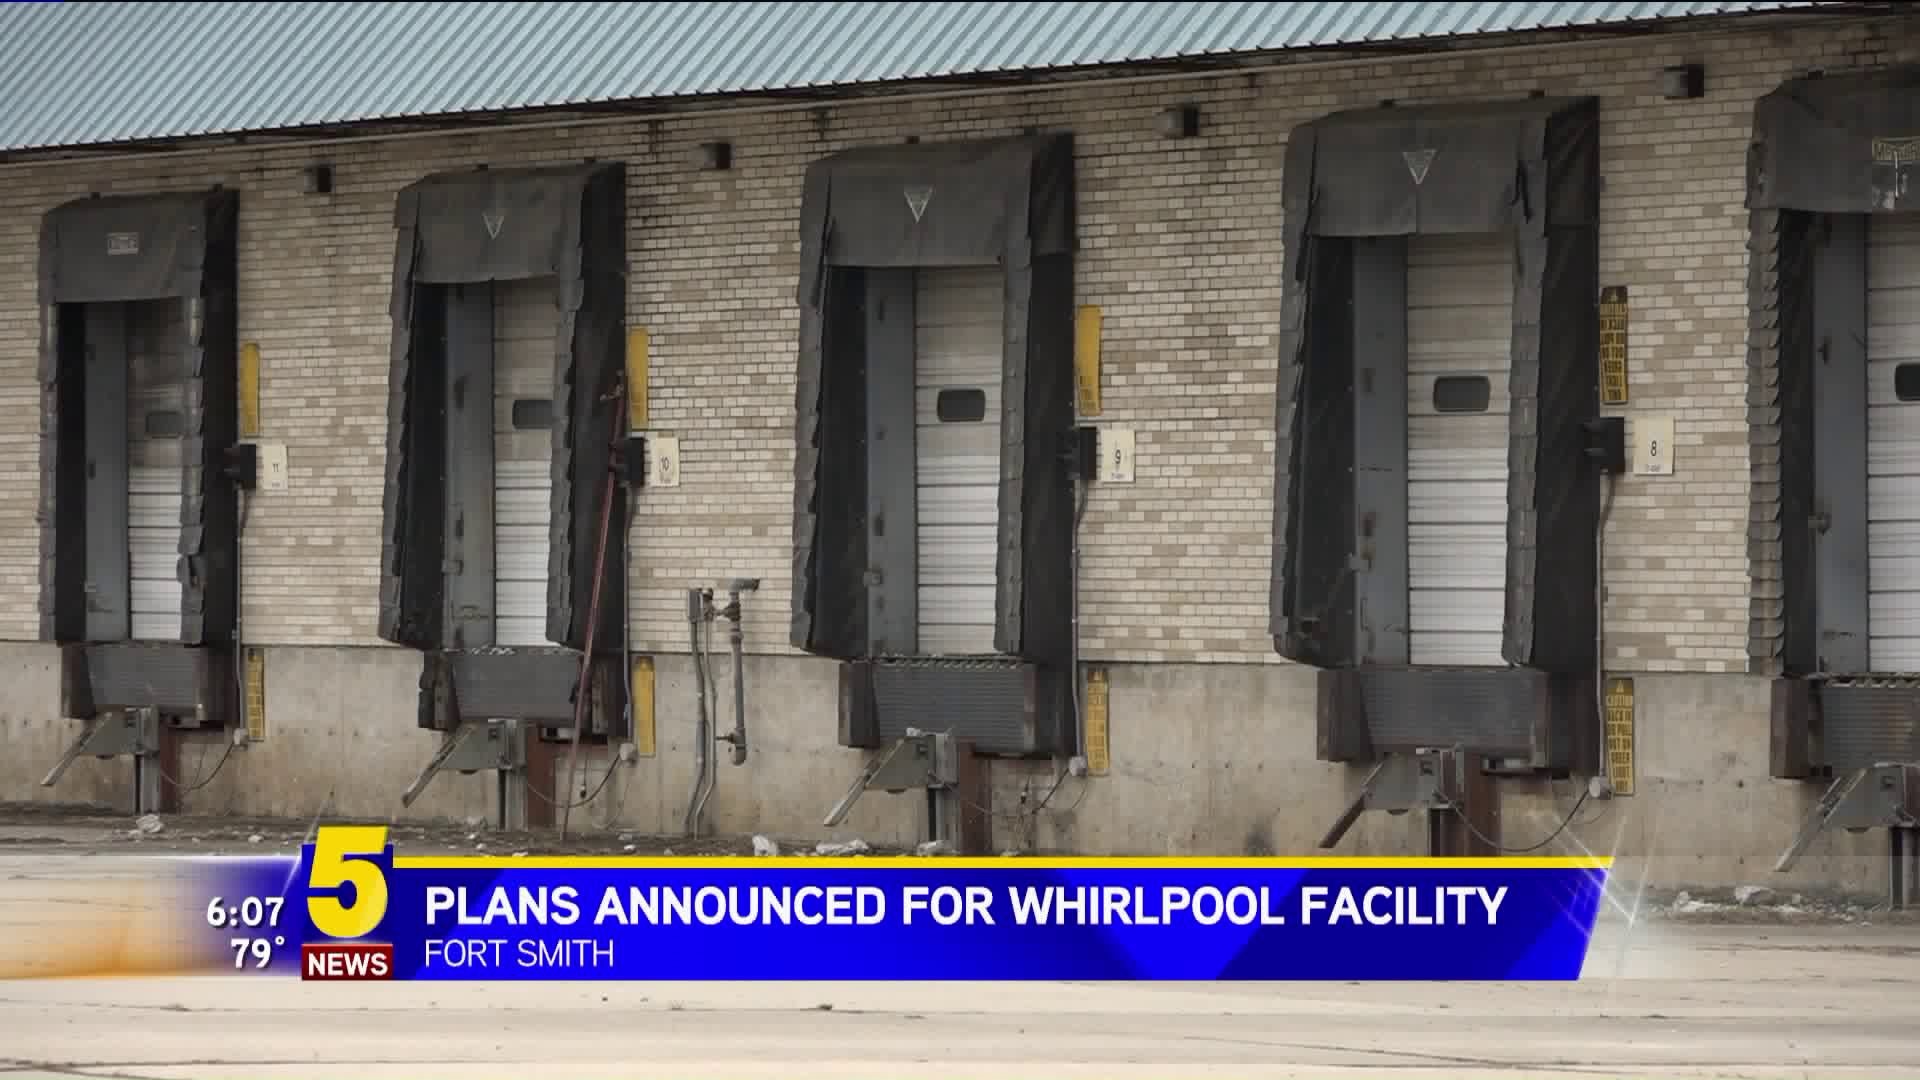 Plans Announced For Whirlpool Facility